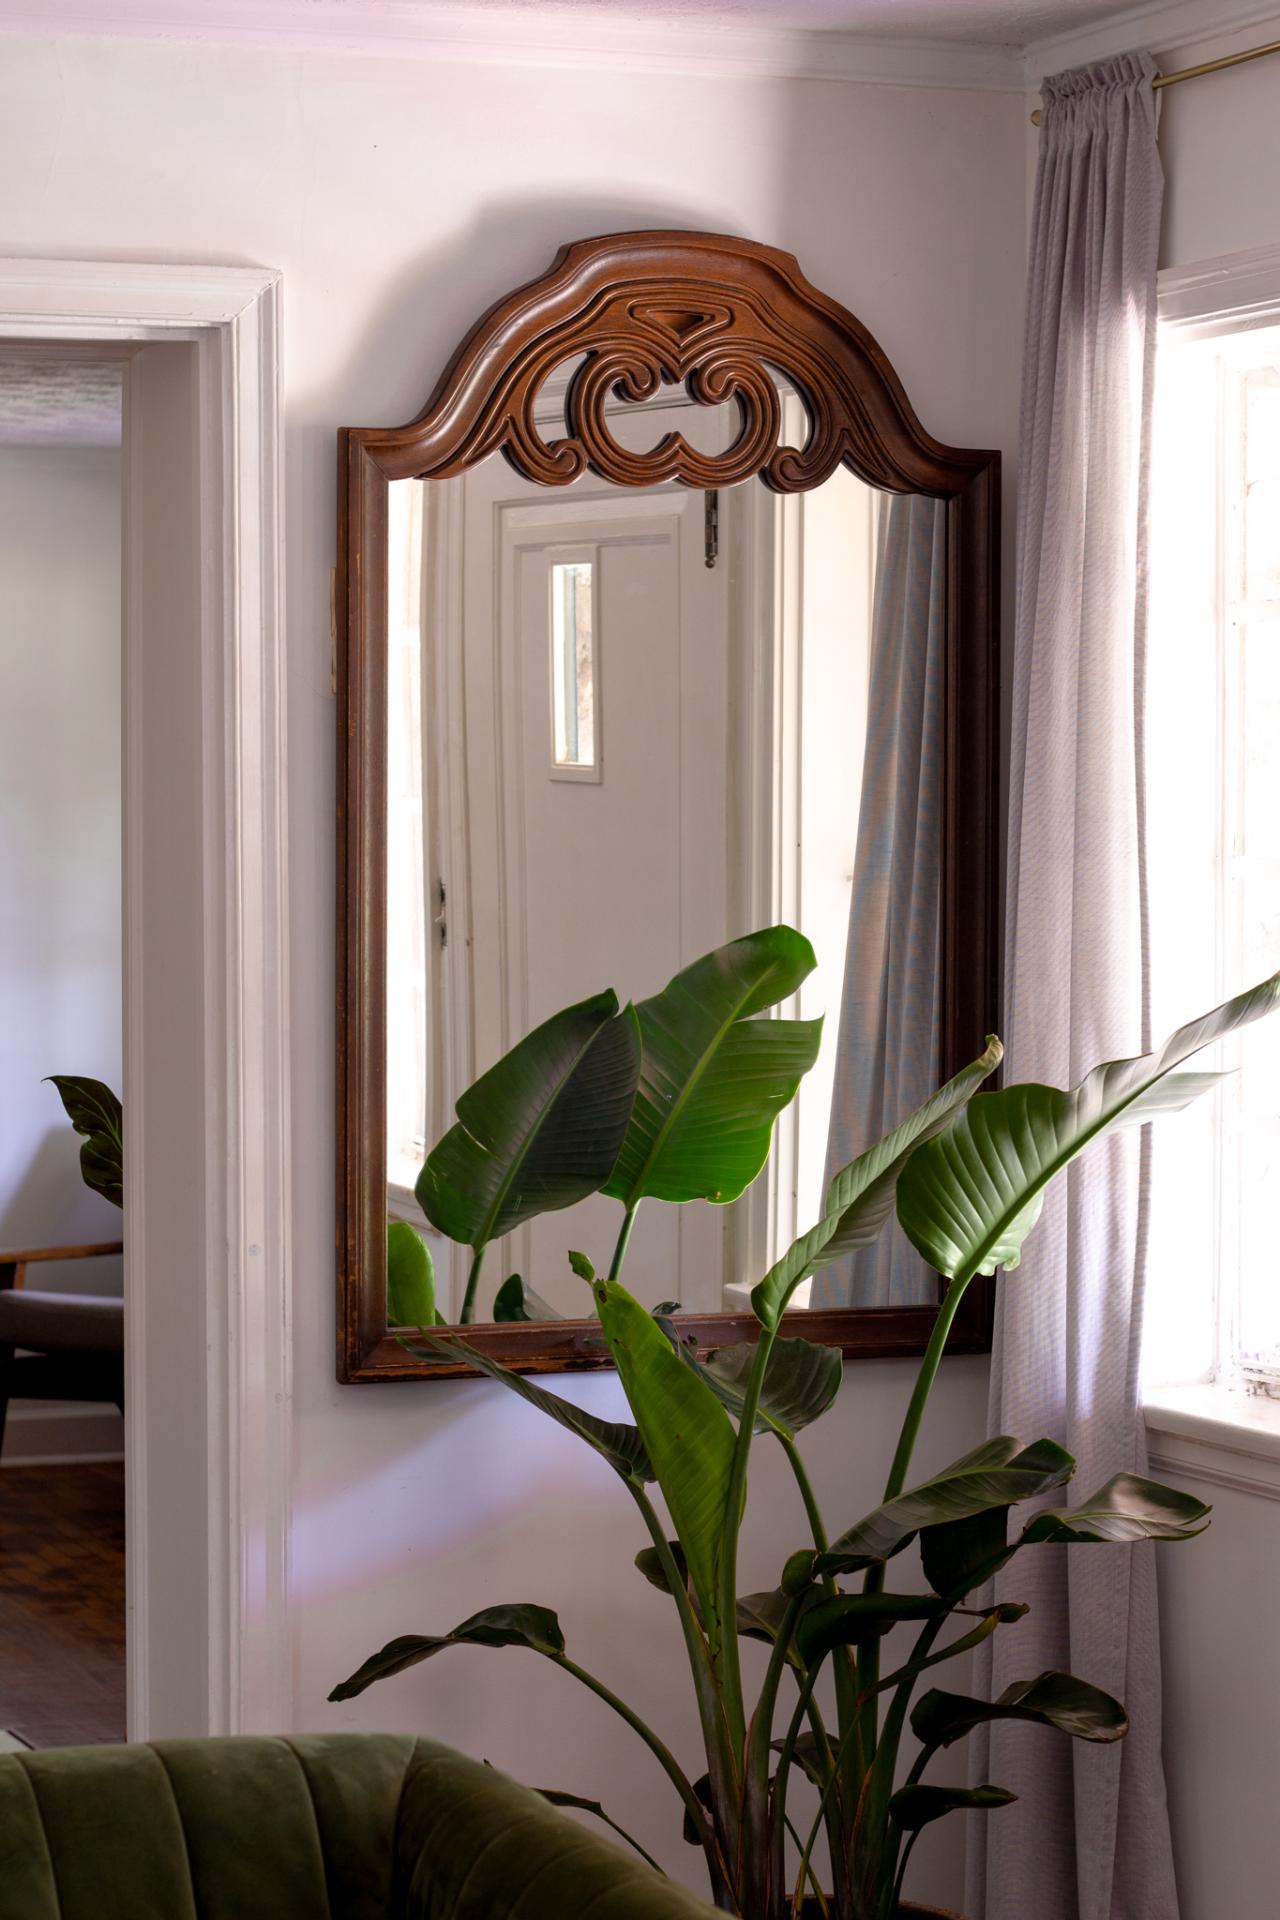 How To Hang A Heavy Mirror With, Best Way To Hang A Heavy Mirror Without Damaging The Wall